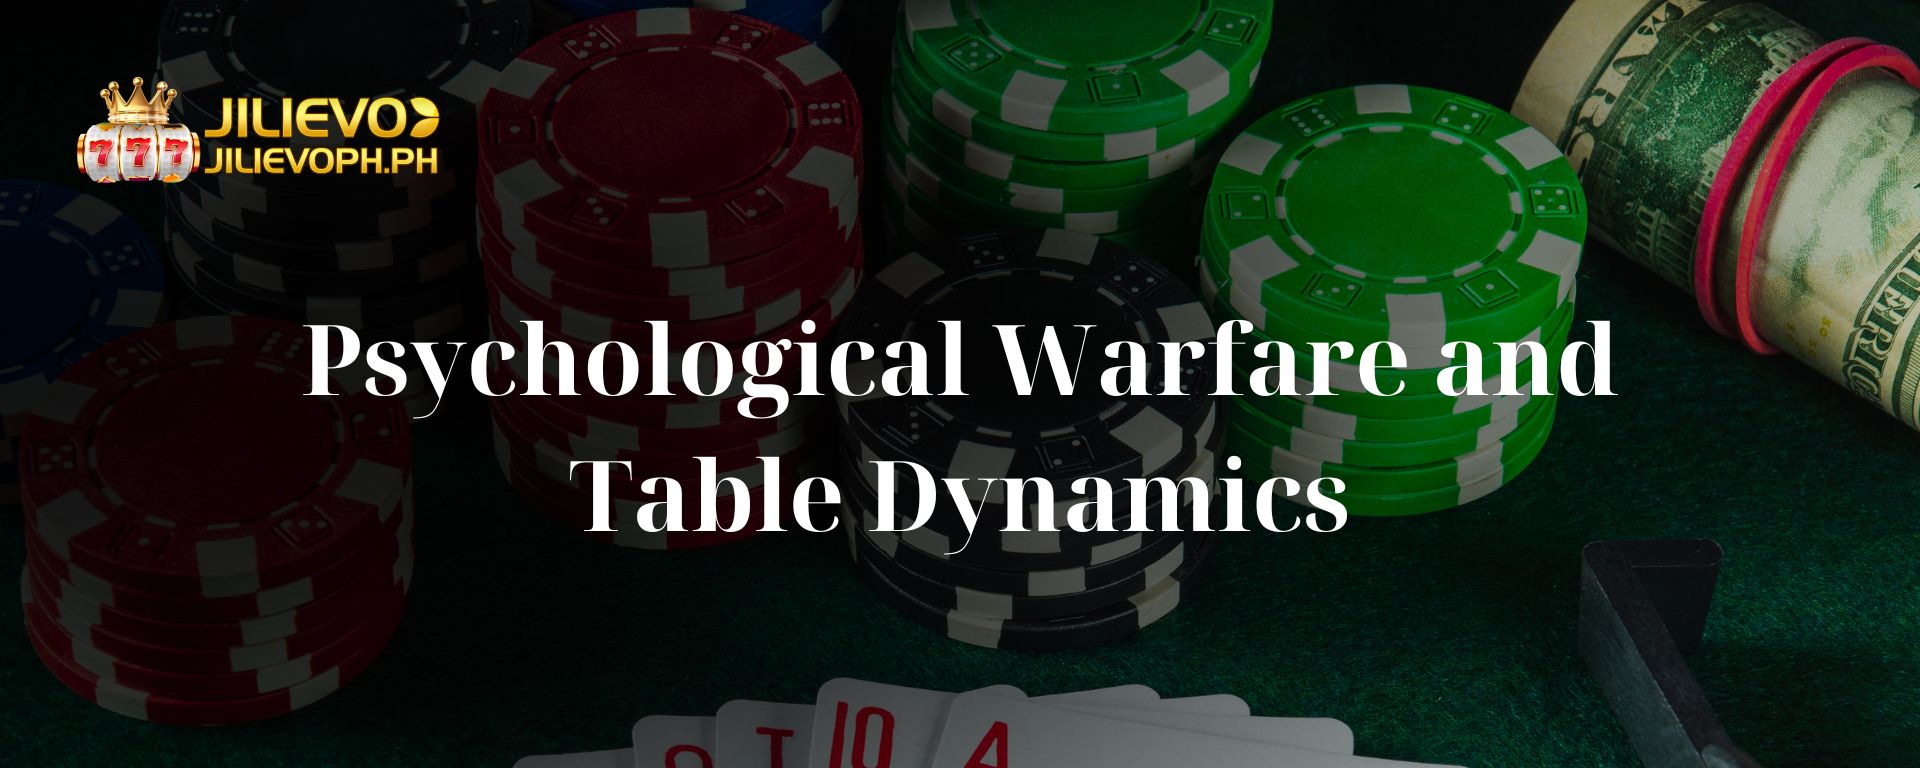 Psychological Warfare and Table Dynamics